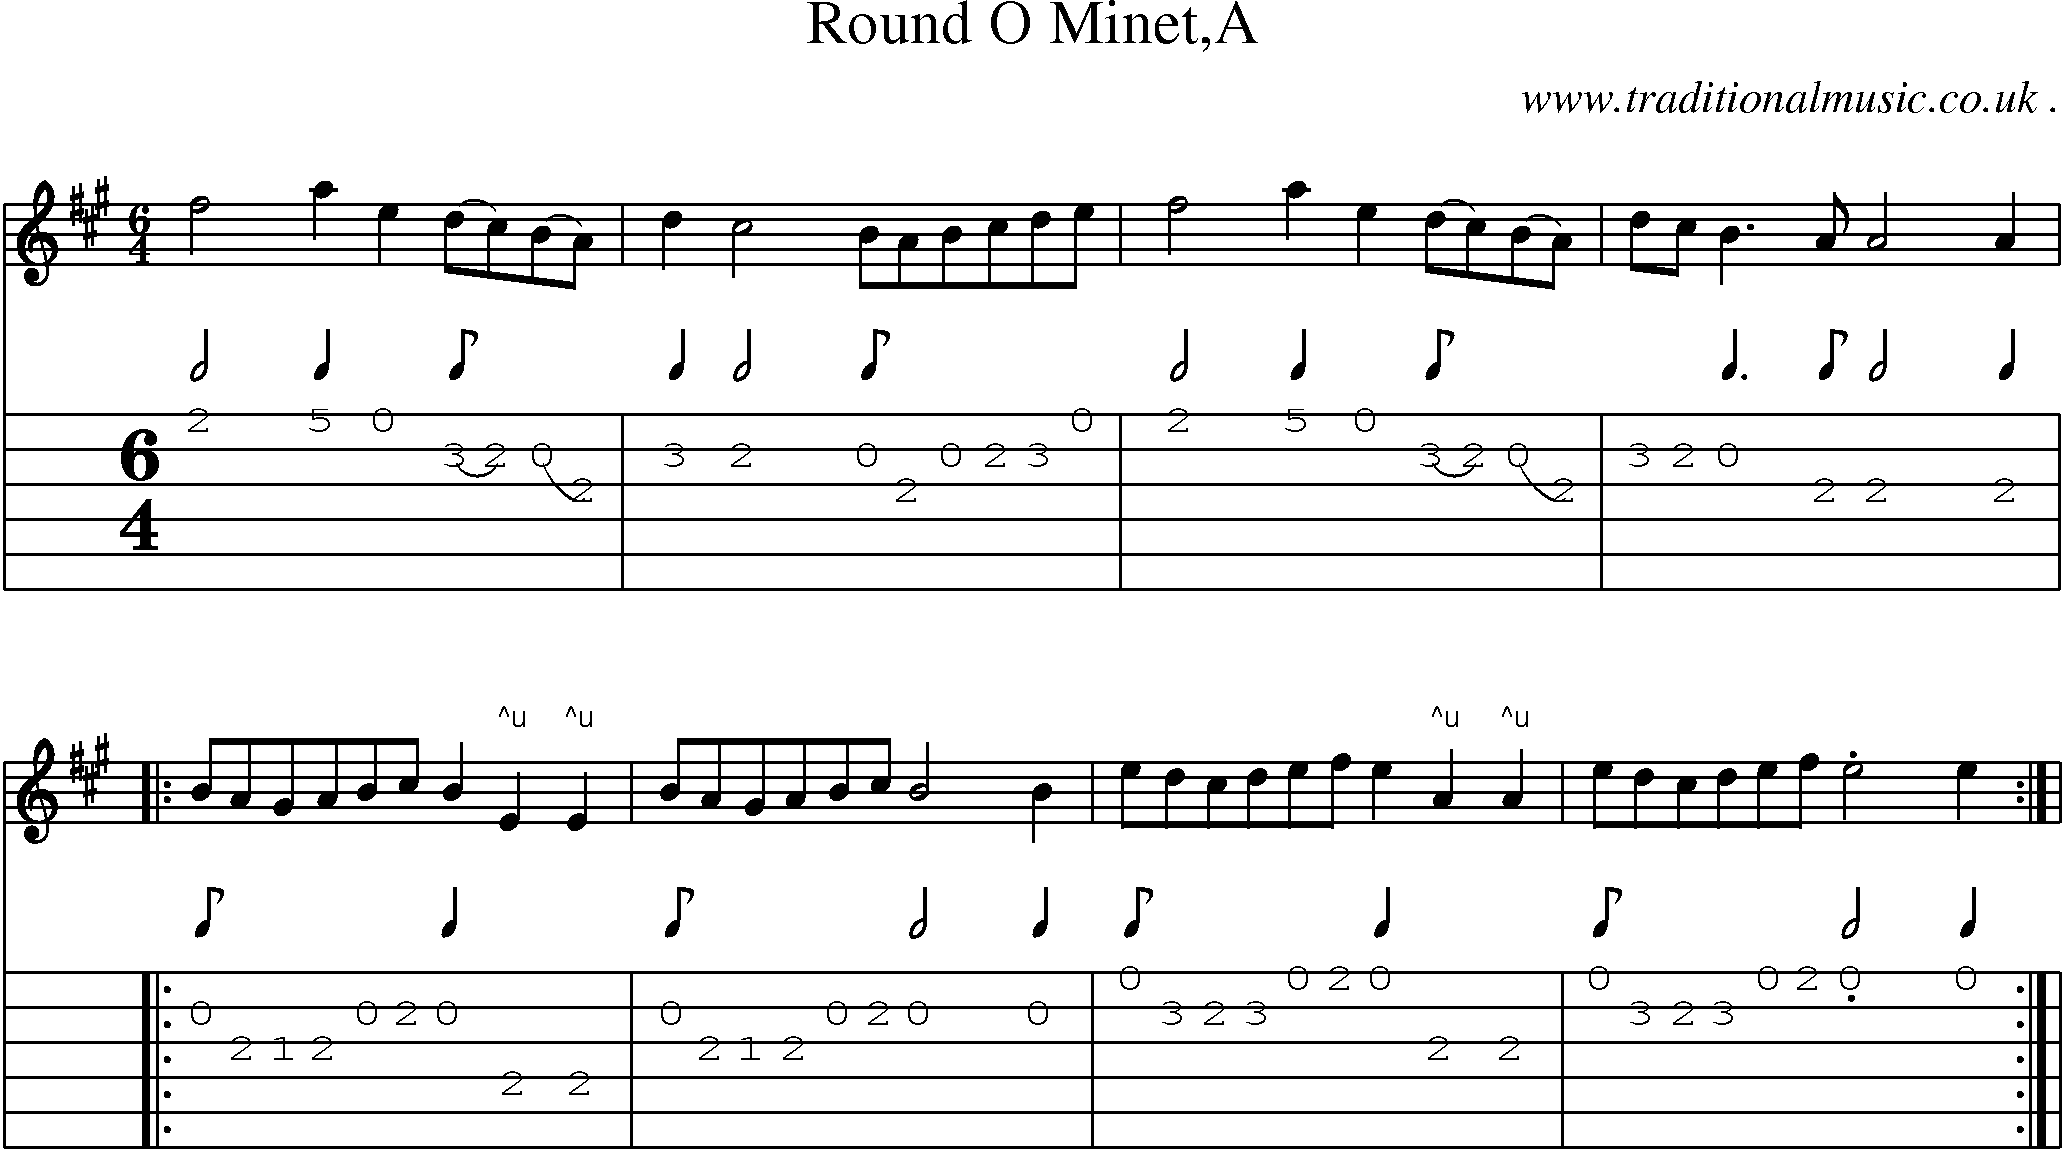 Sheet-Music and Guitar Tabs for Round O Mineta